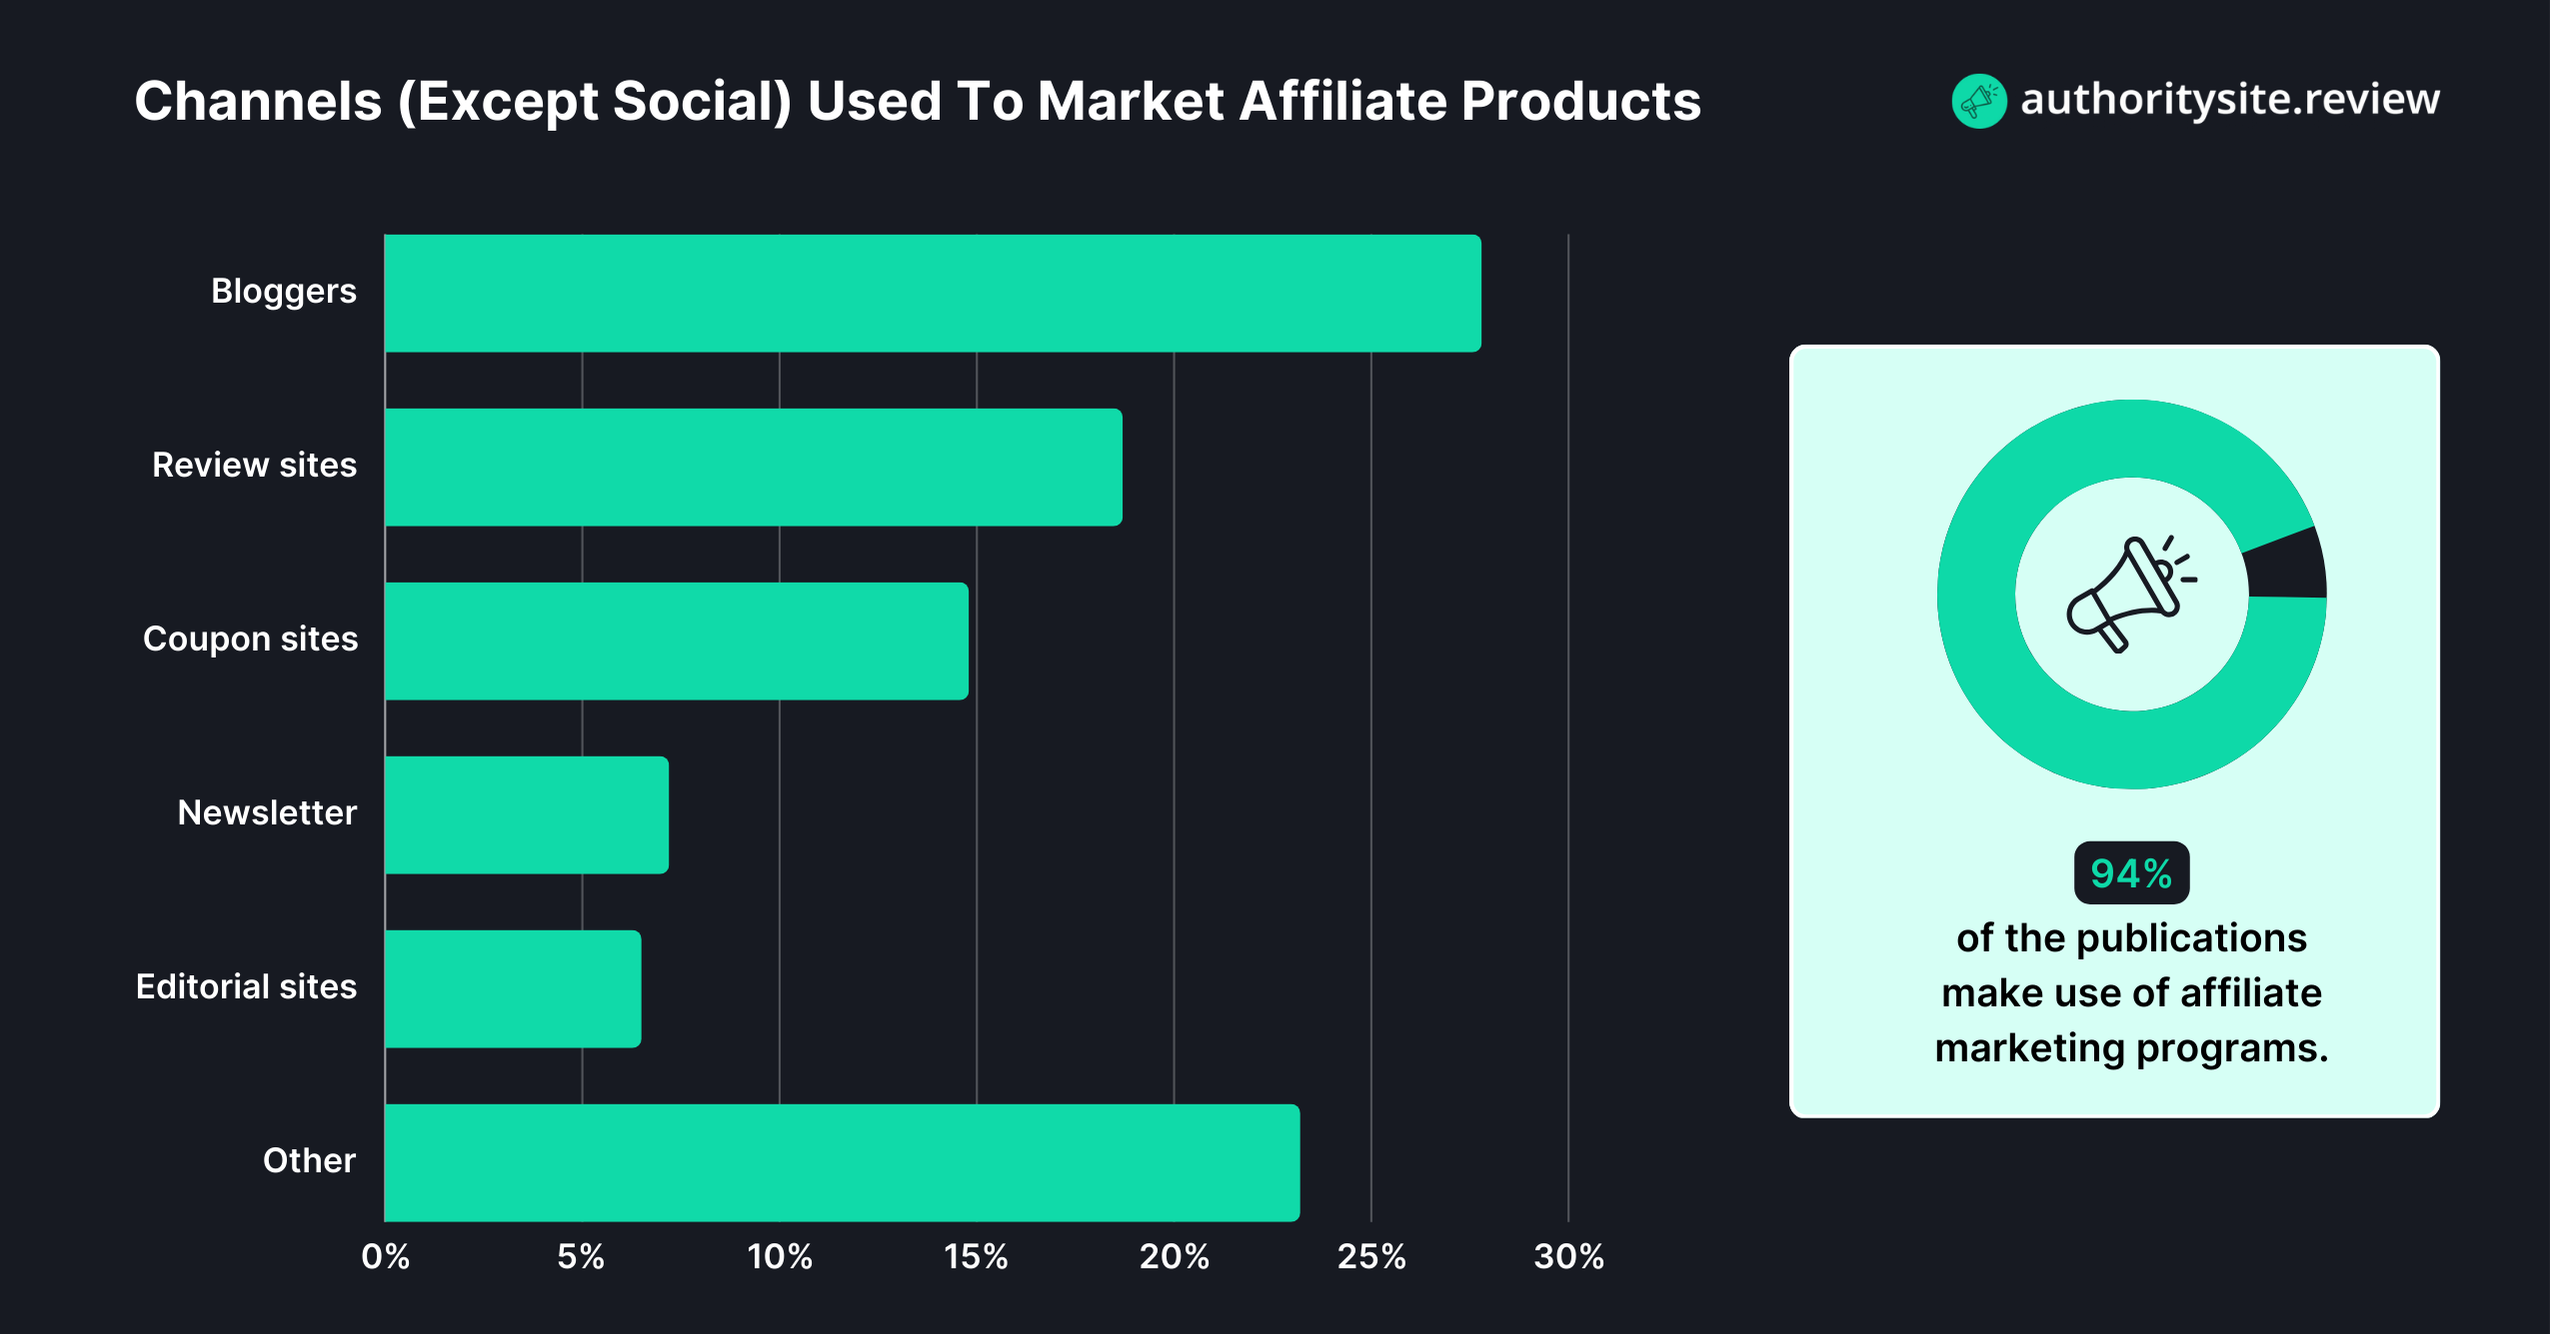 Channels Used To Market Affiliate Products